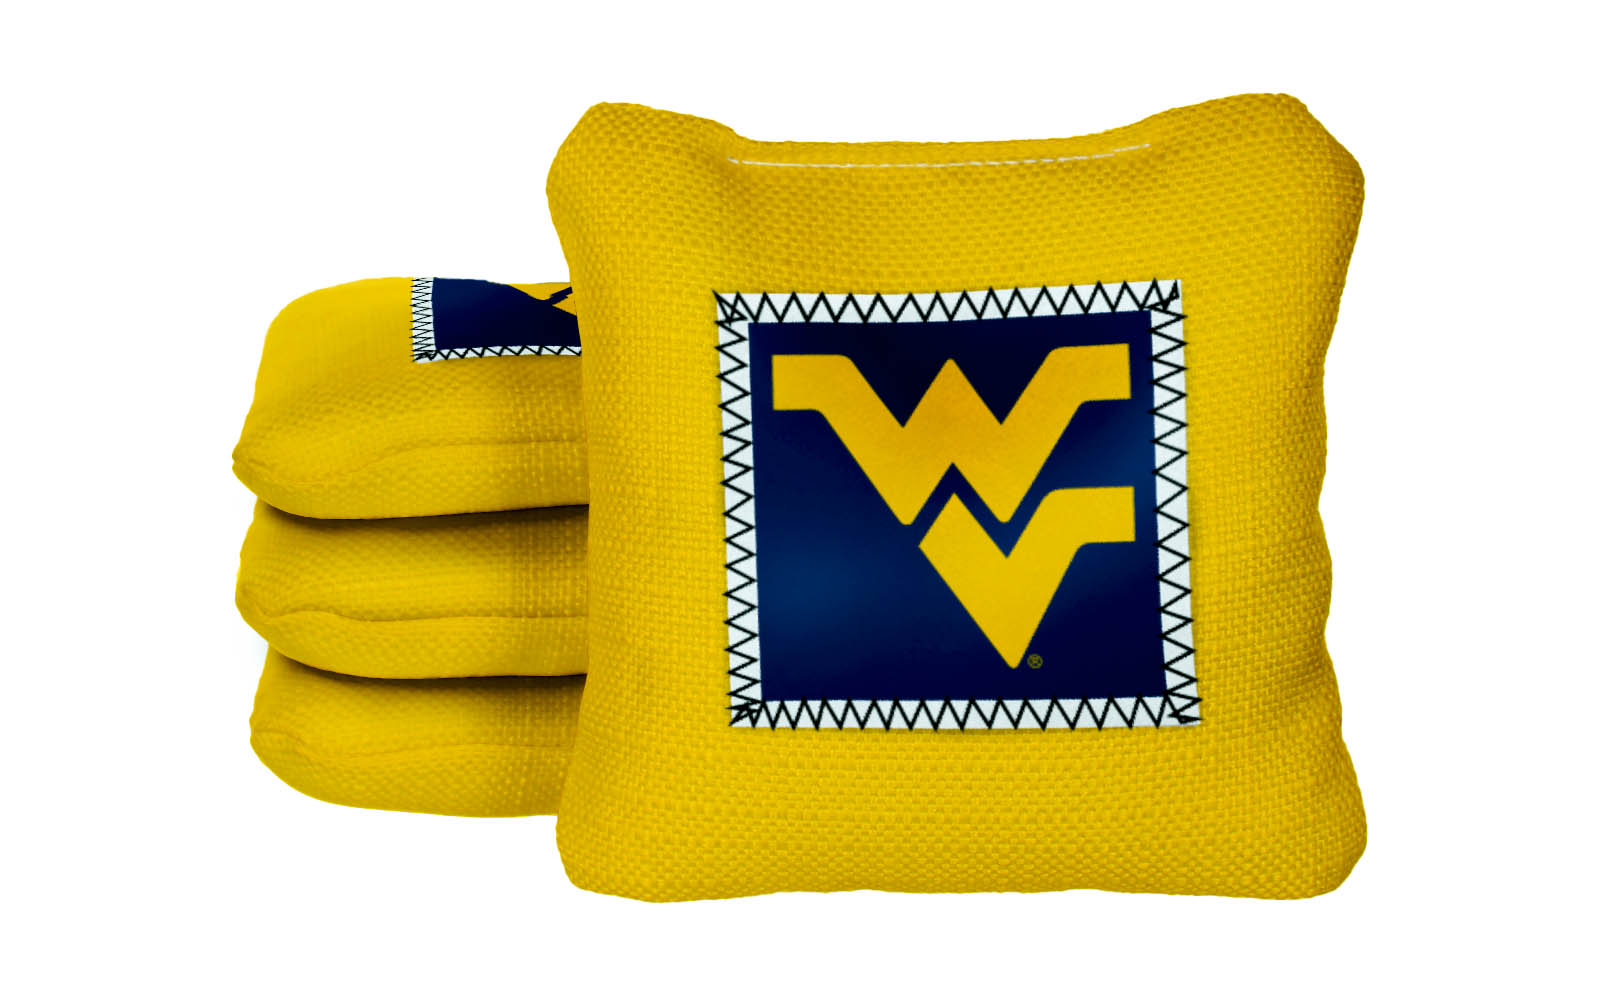 Officially Licensed Collegiate Cornhole Bags - AllCornhole Game Changers Steady 2.0 - Set of 4 - West Virginia University